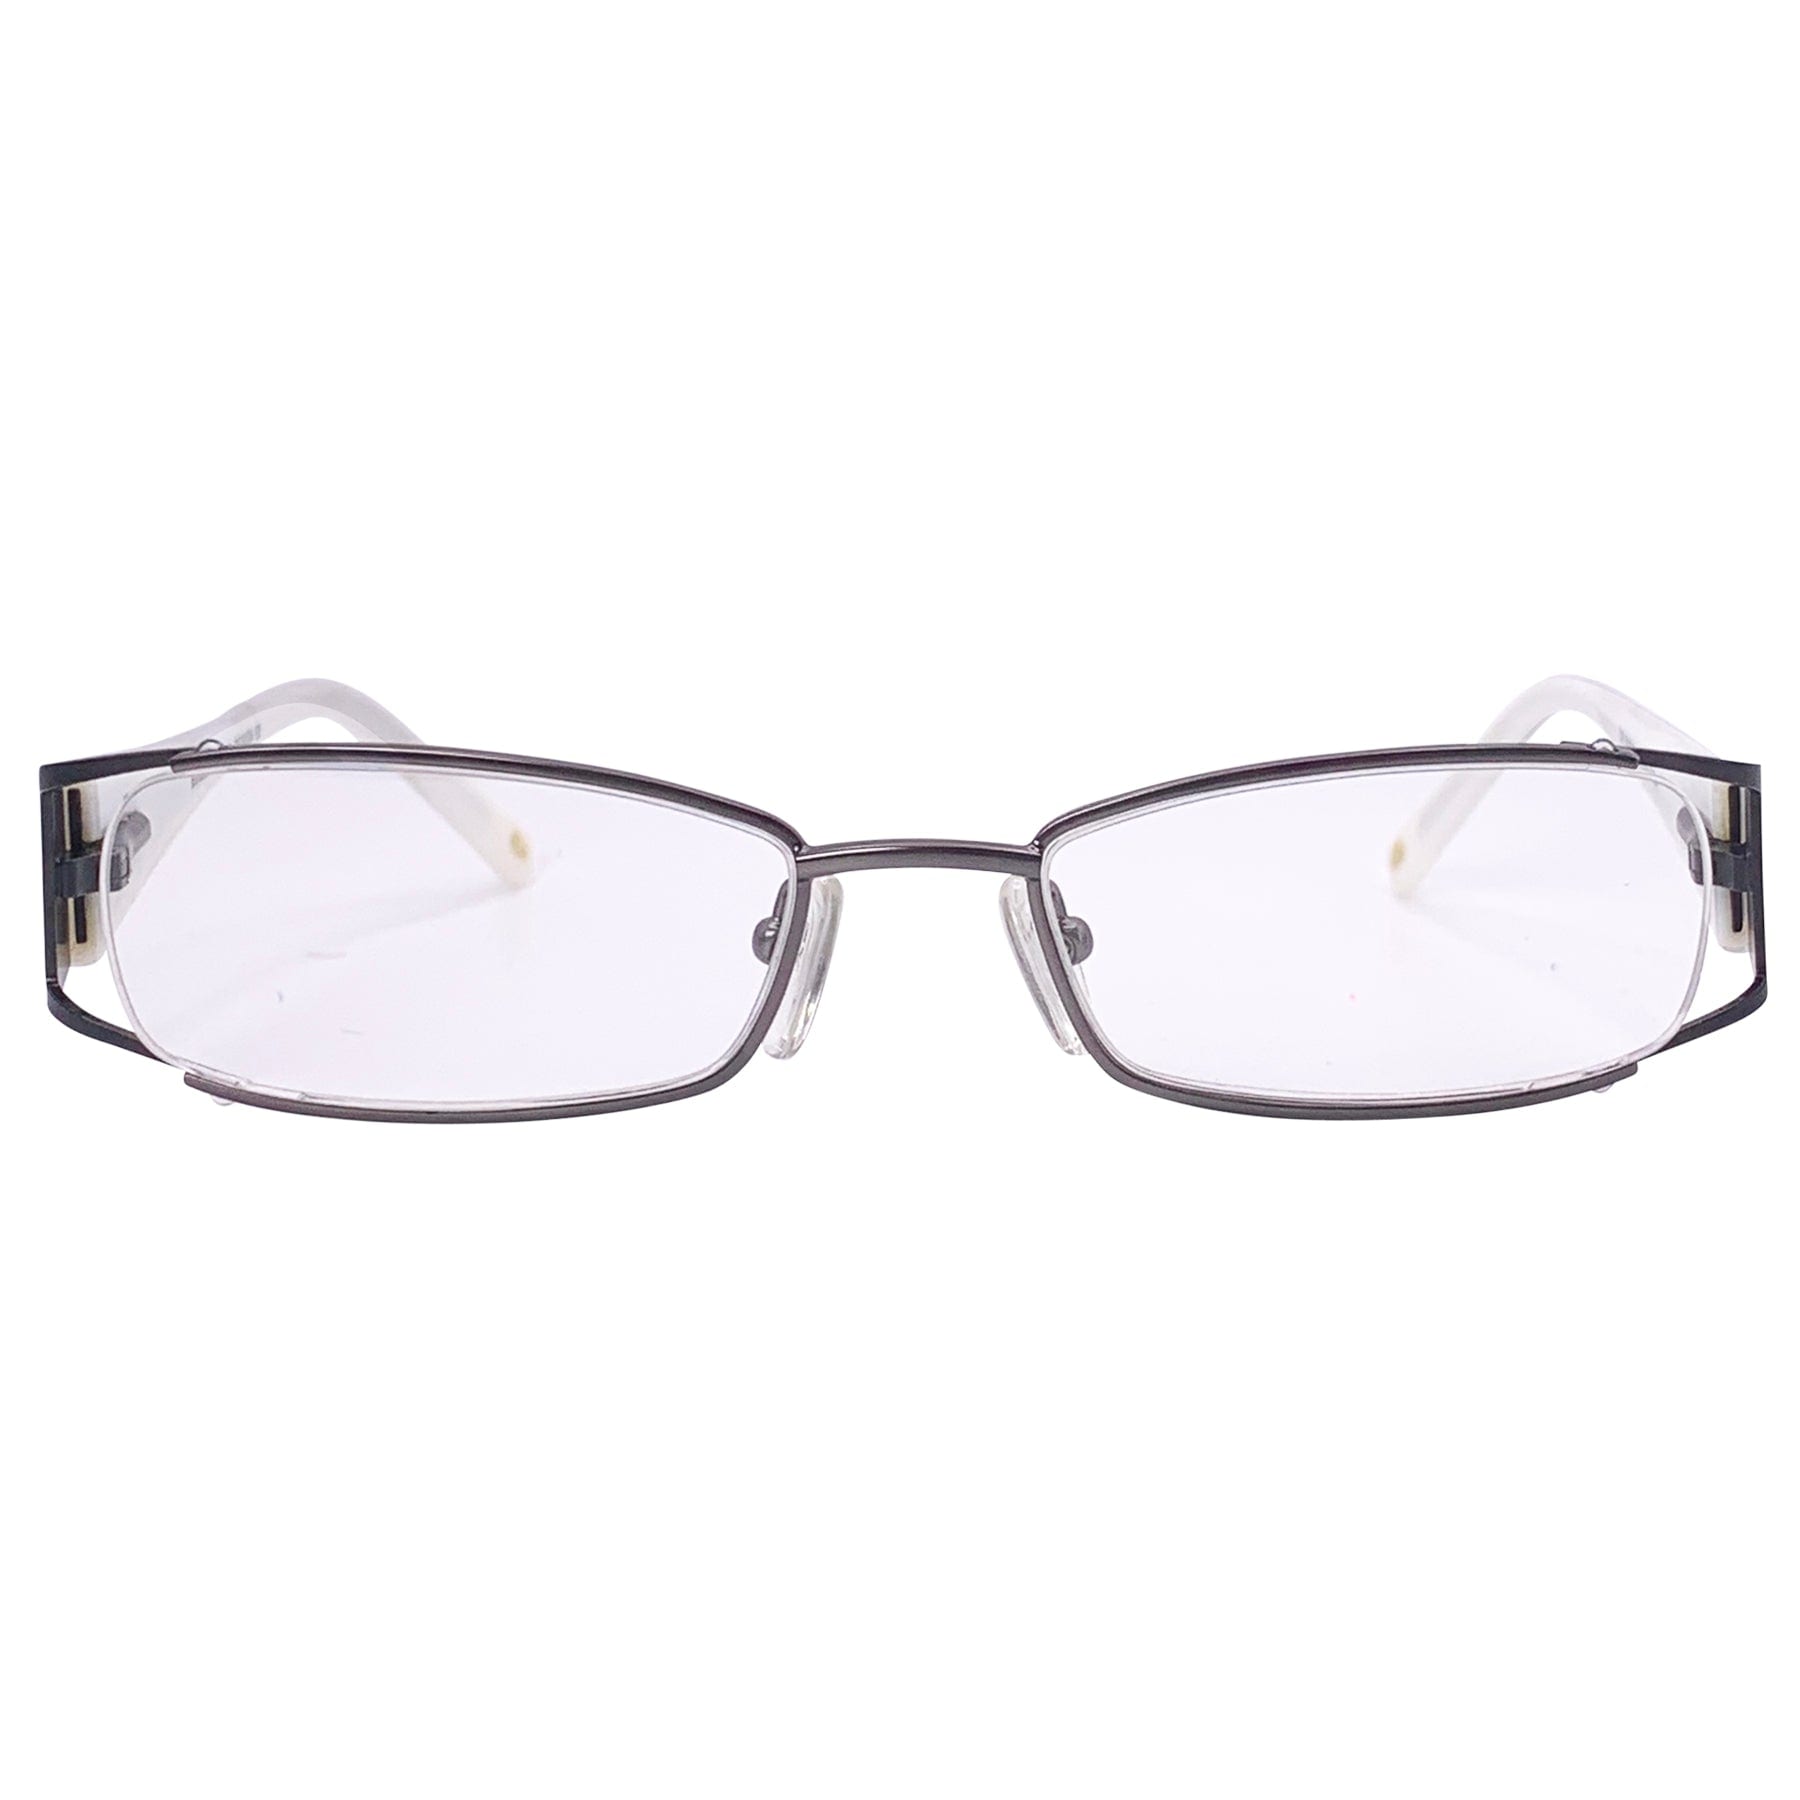 tan color glasses with a clear lens and 90s frame 